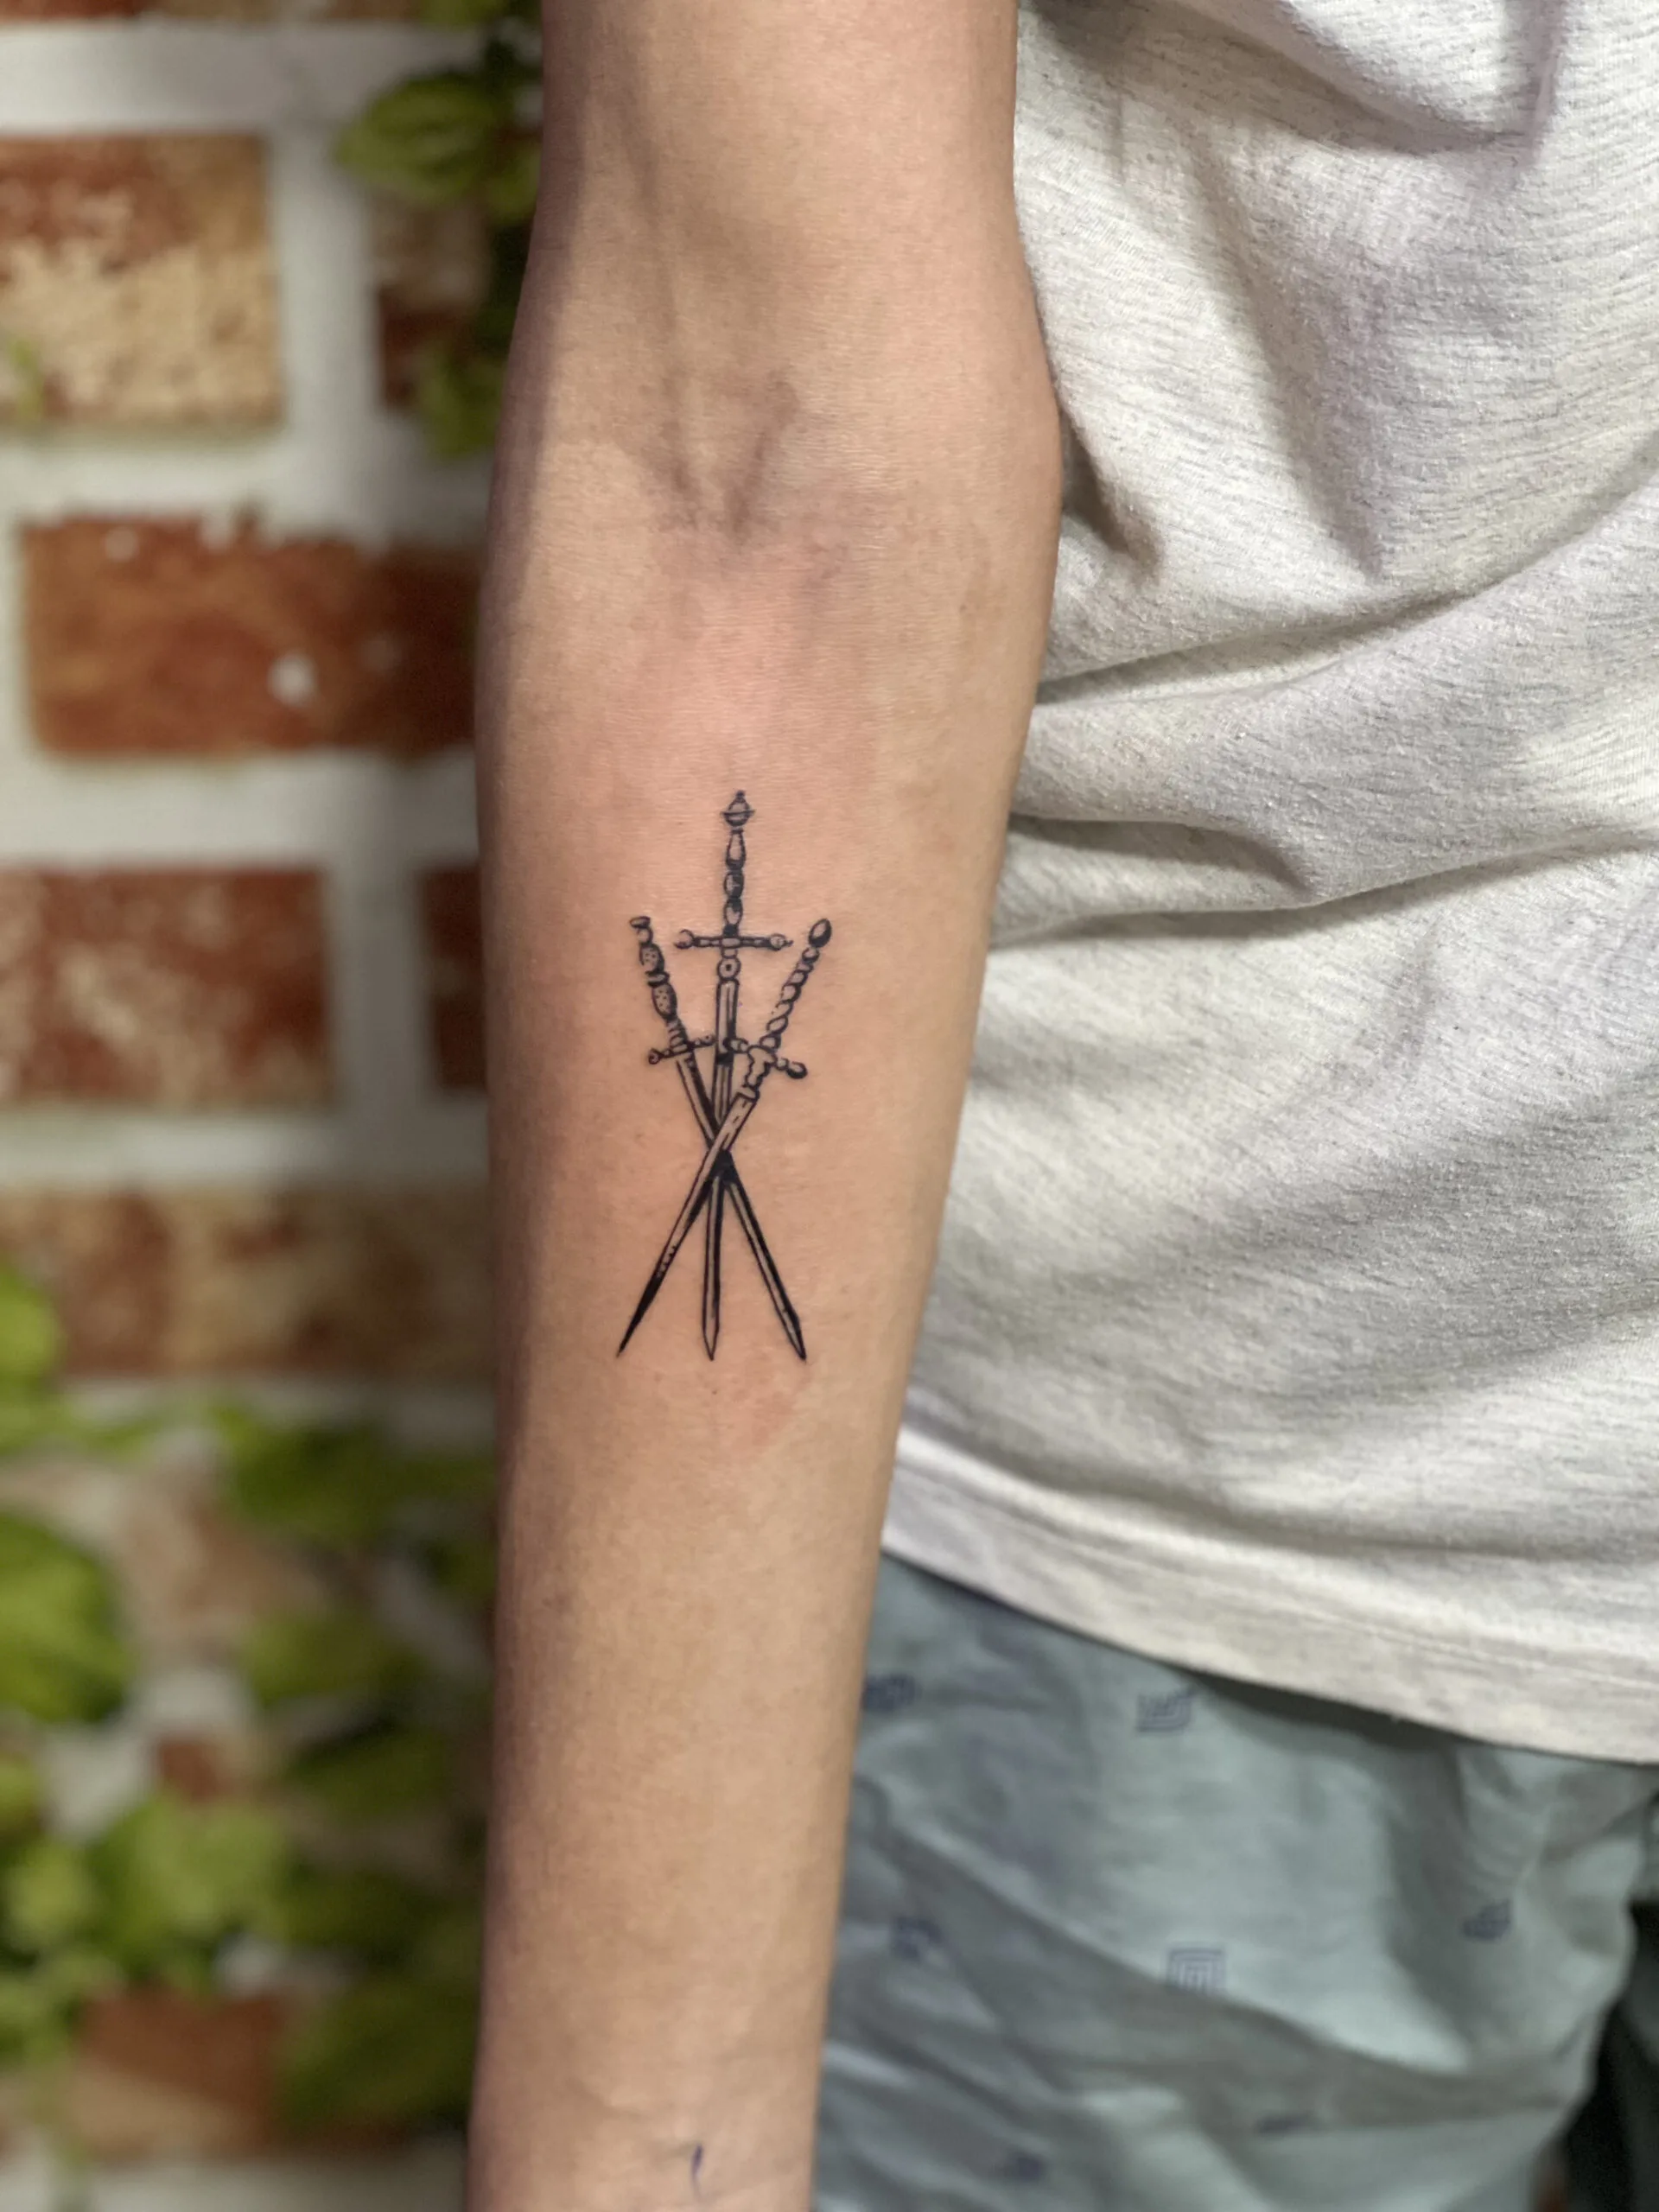 3 swords tattoo meaning